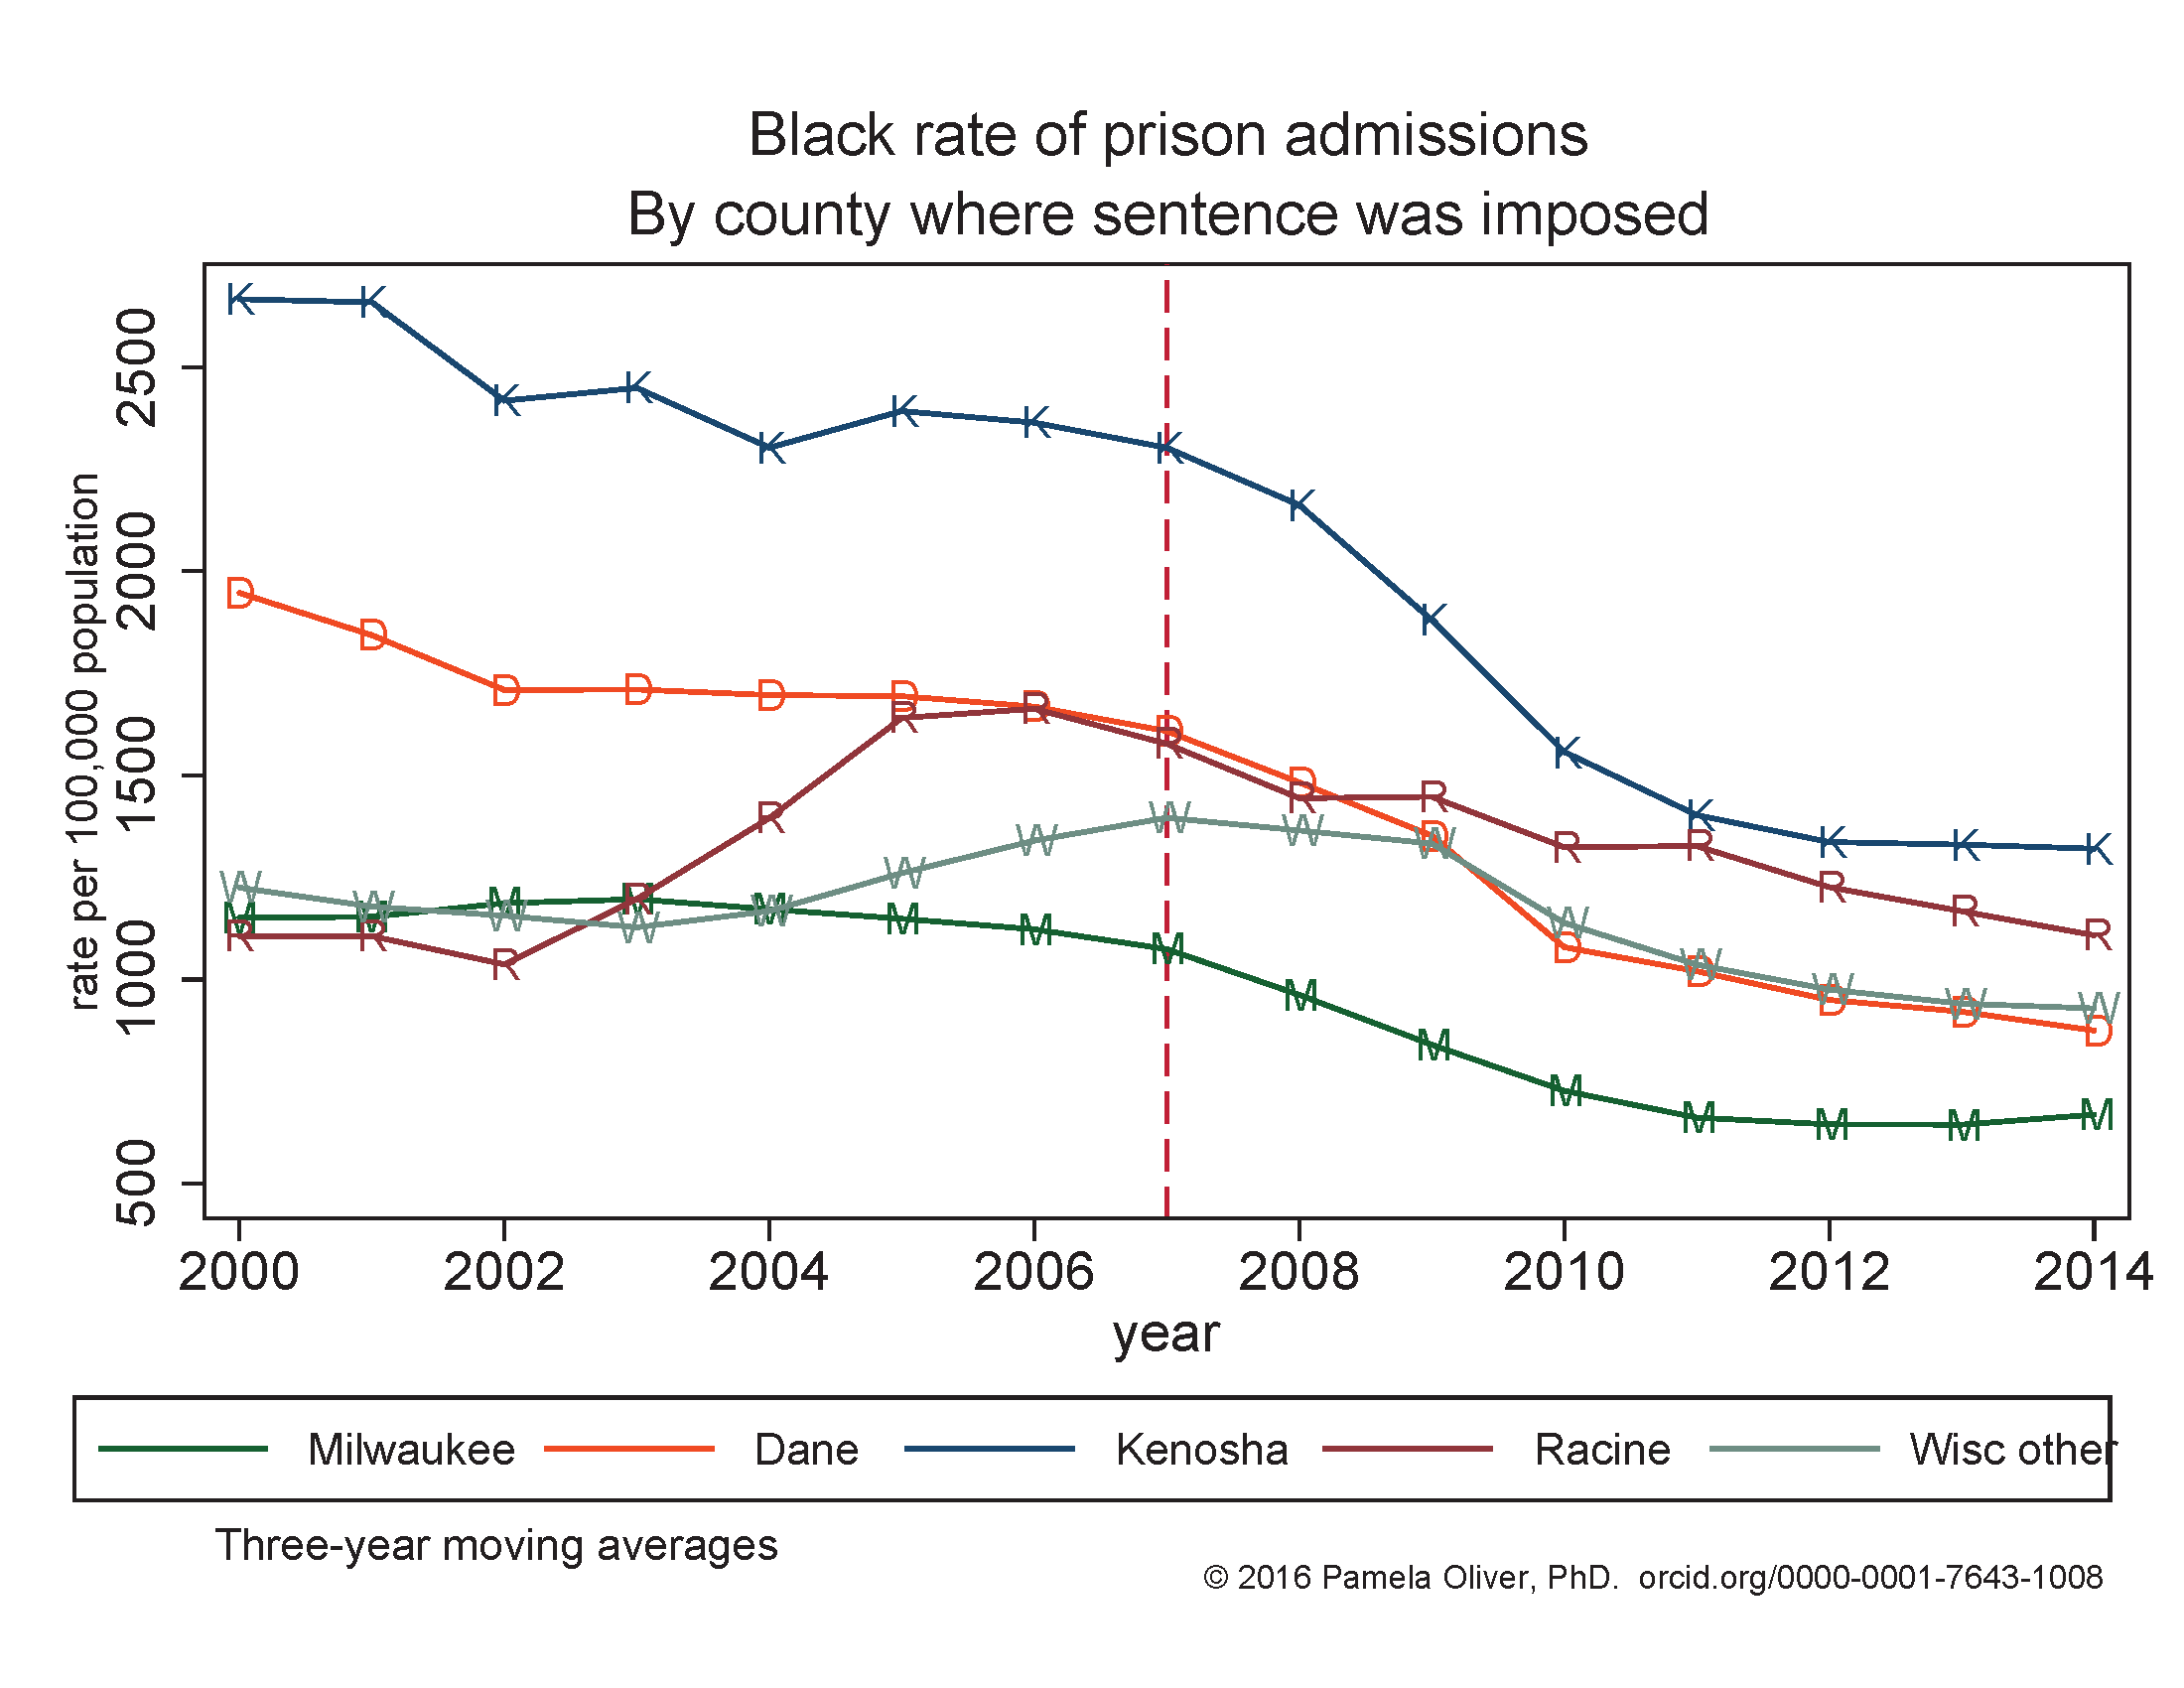 Black prison admission rate by Wisconsin county